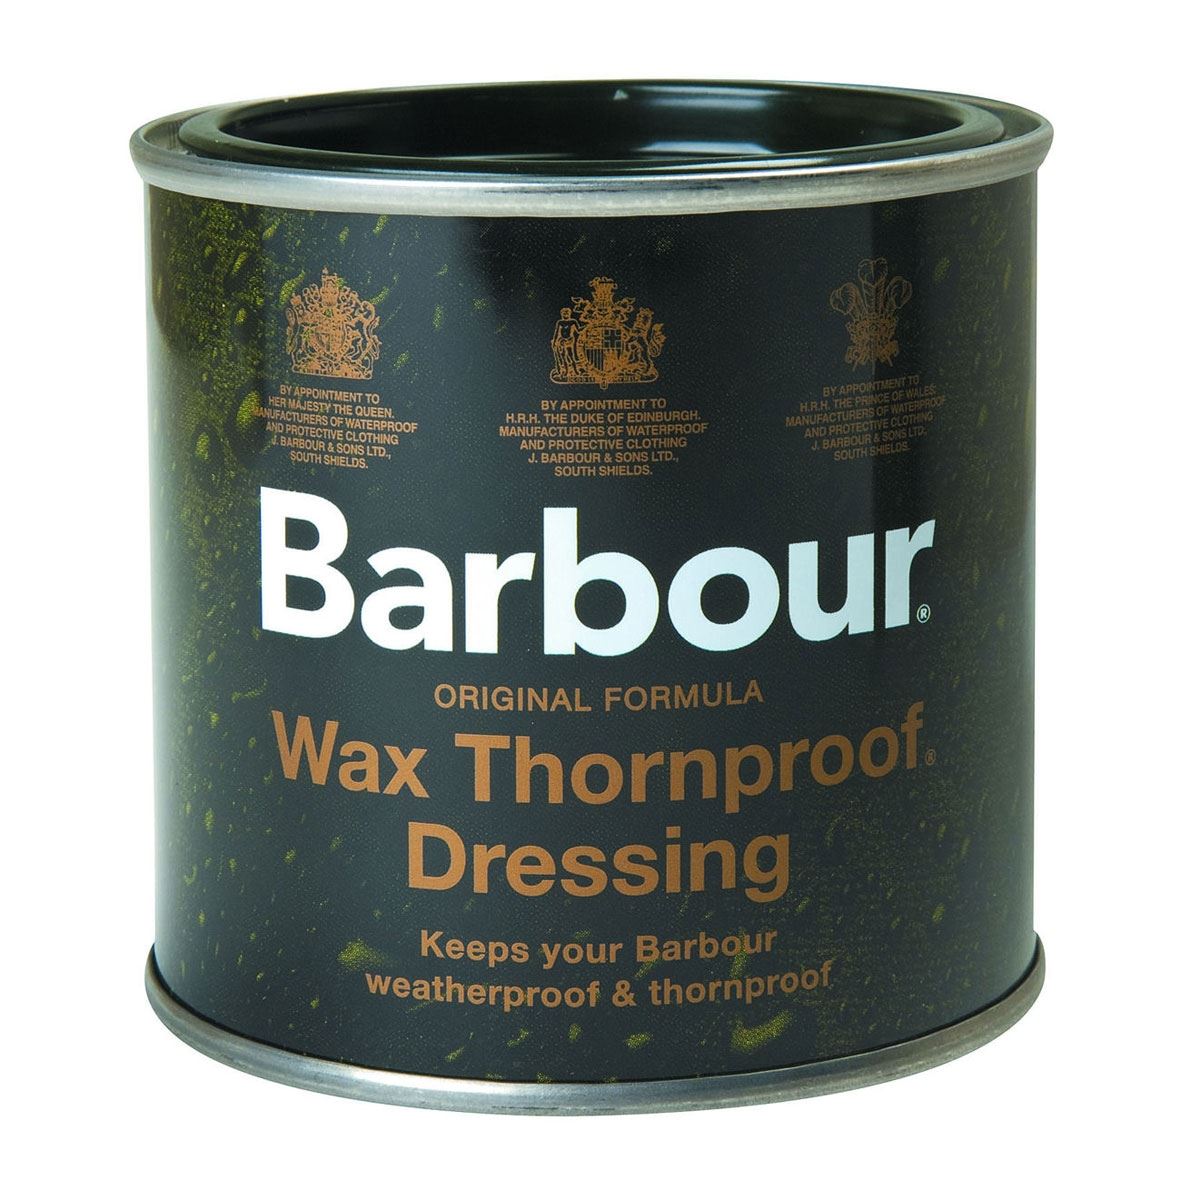 Looking for details on Barbour wax for cleaning and rewaxing a jacket?